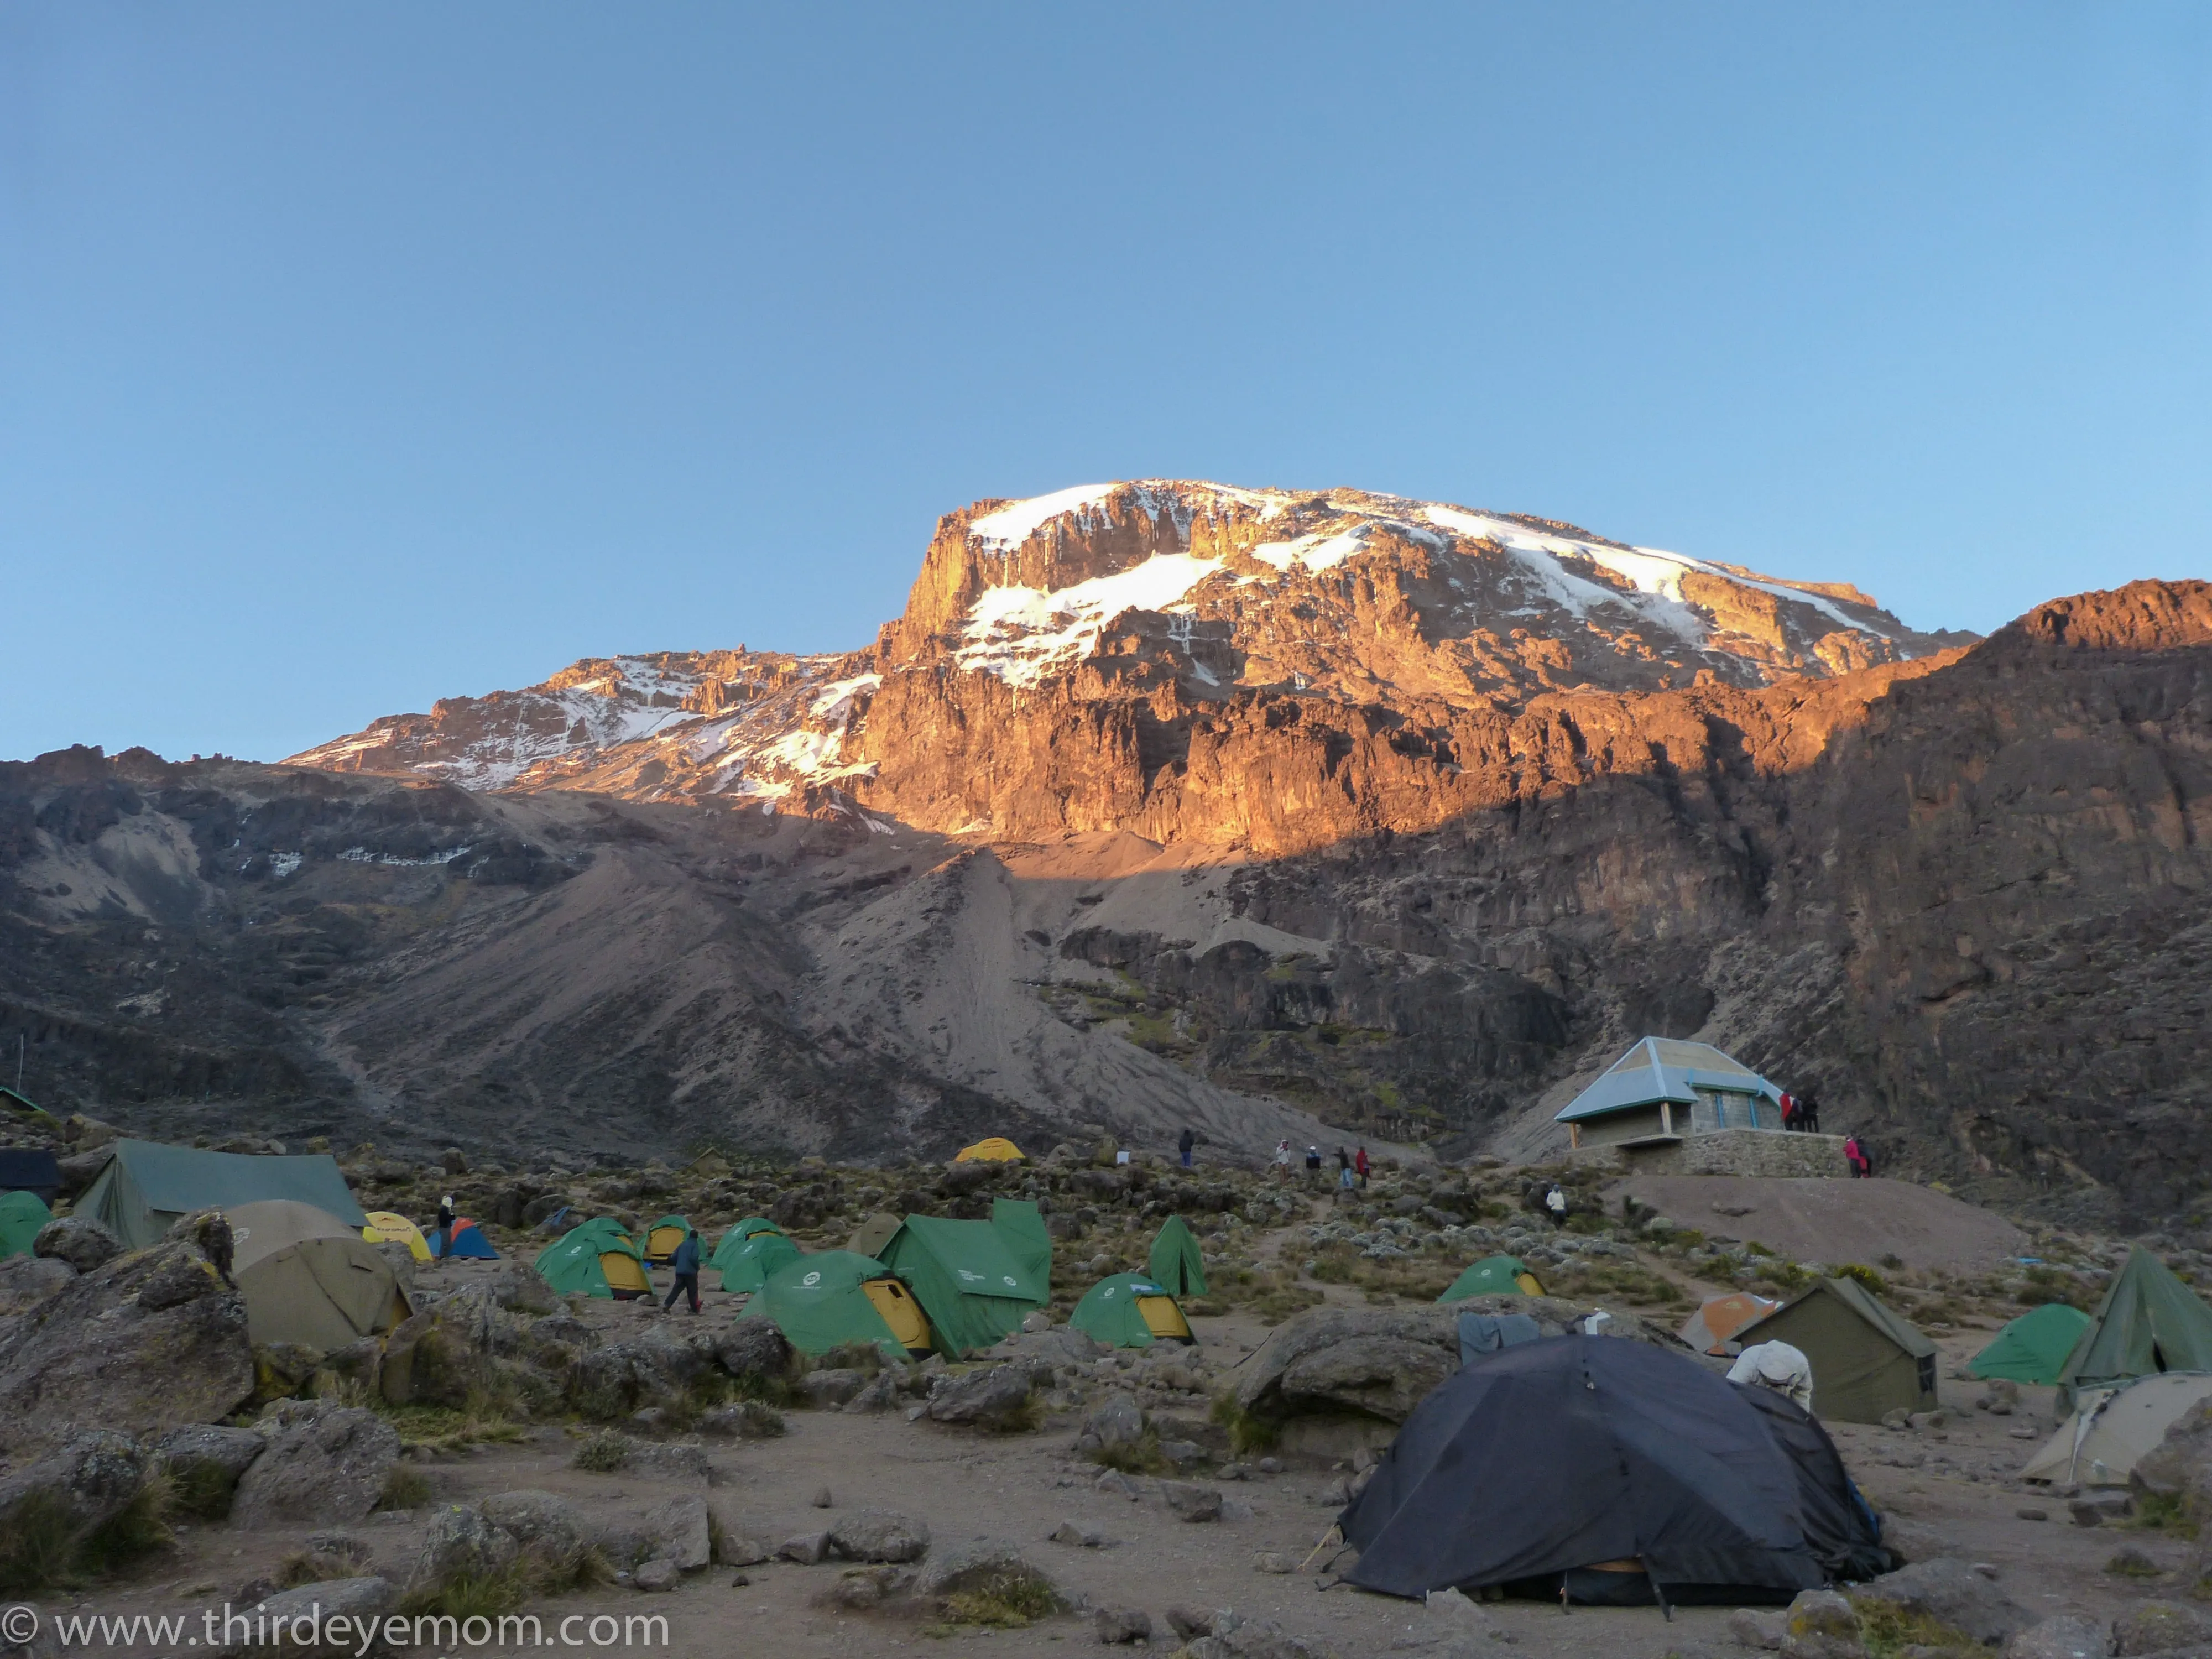 Trekking from Shira 2 Camp to the Lava Tower and descent to Barranco